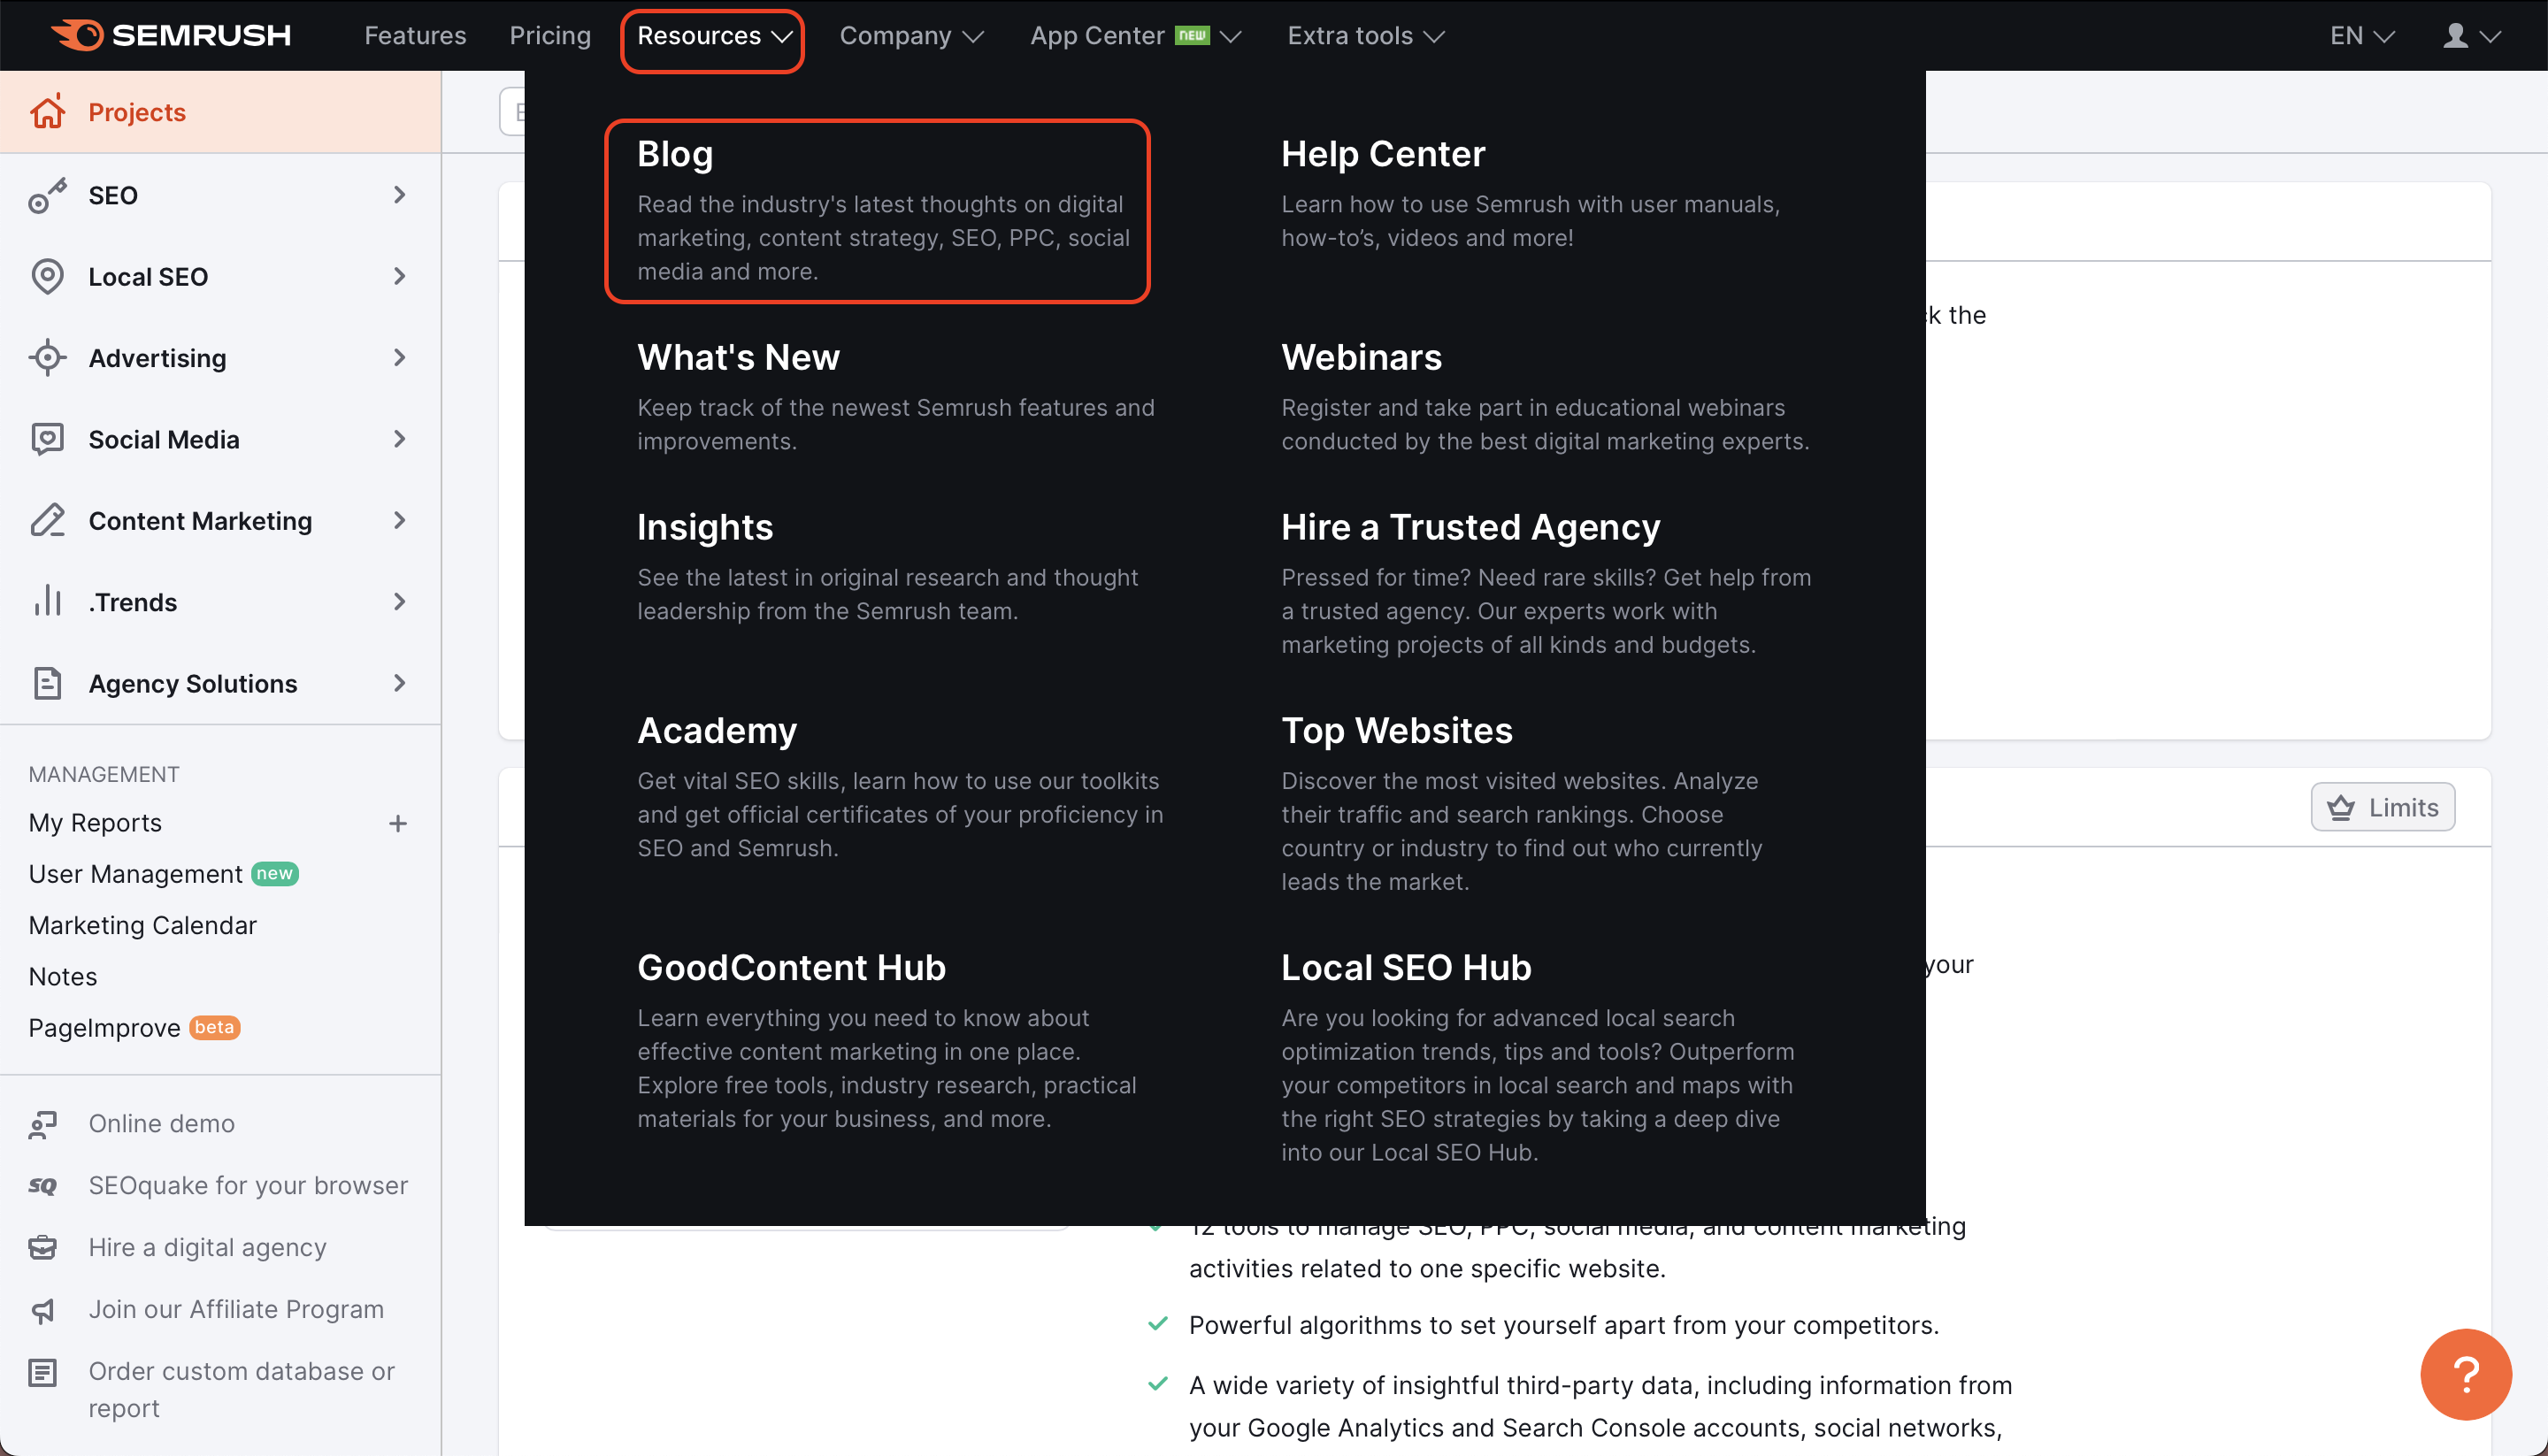 This screenshot shows how to navigate to Blog via 'Resources' at top of the page.